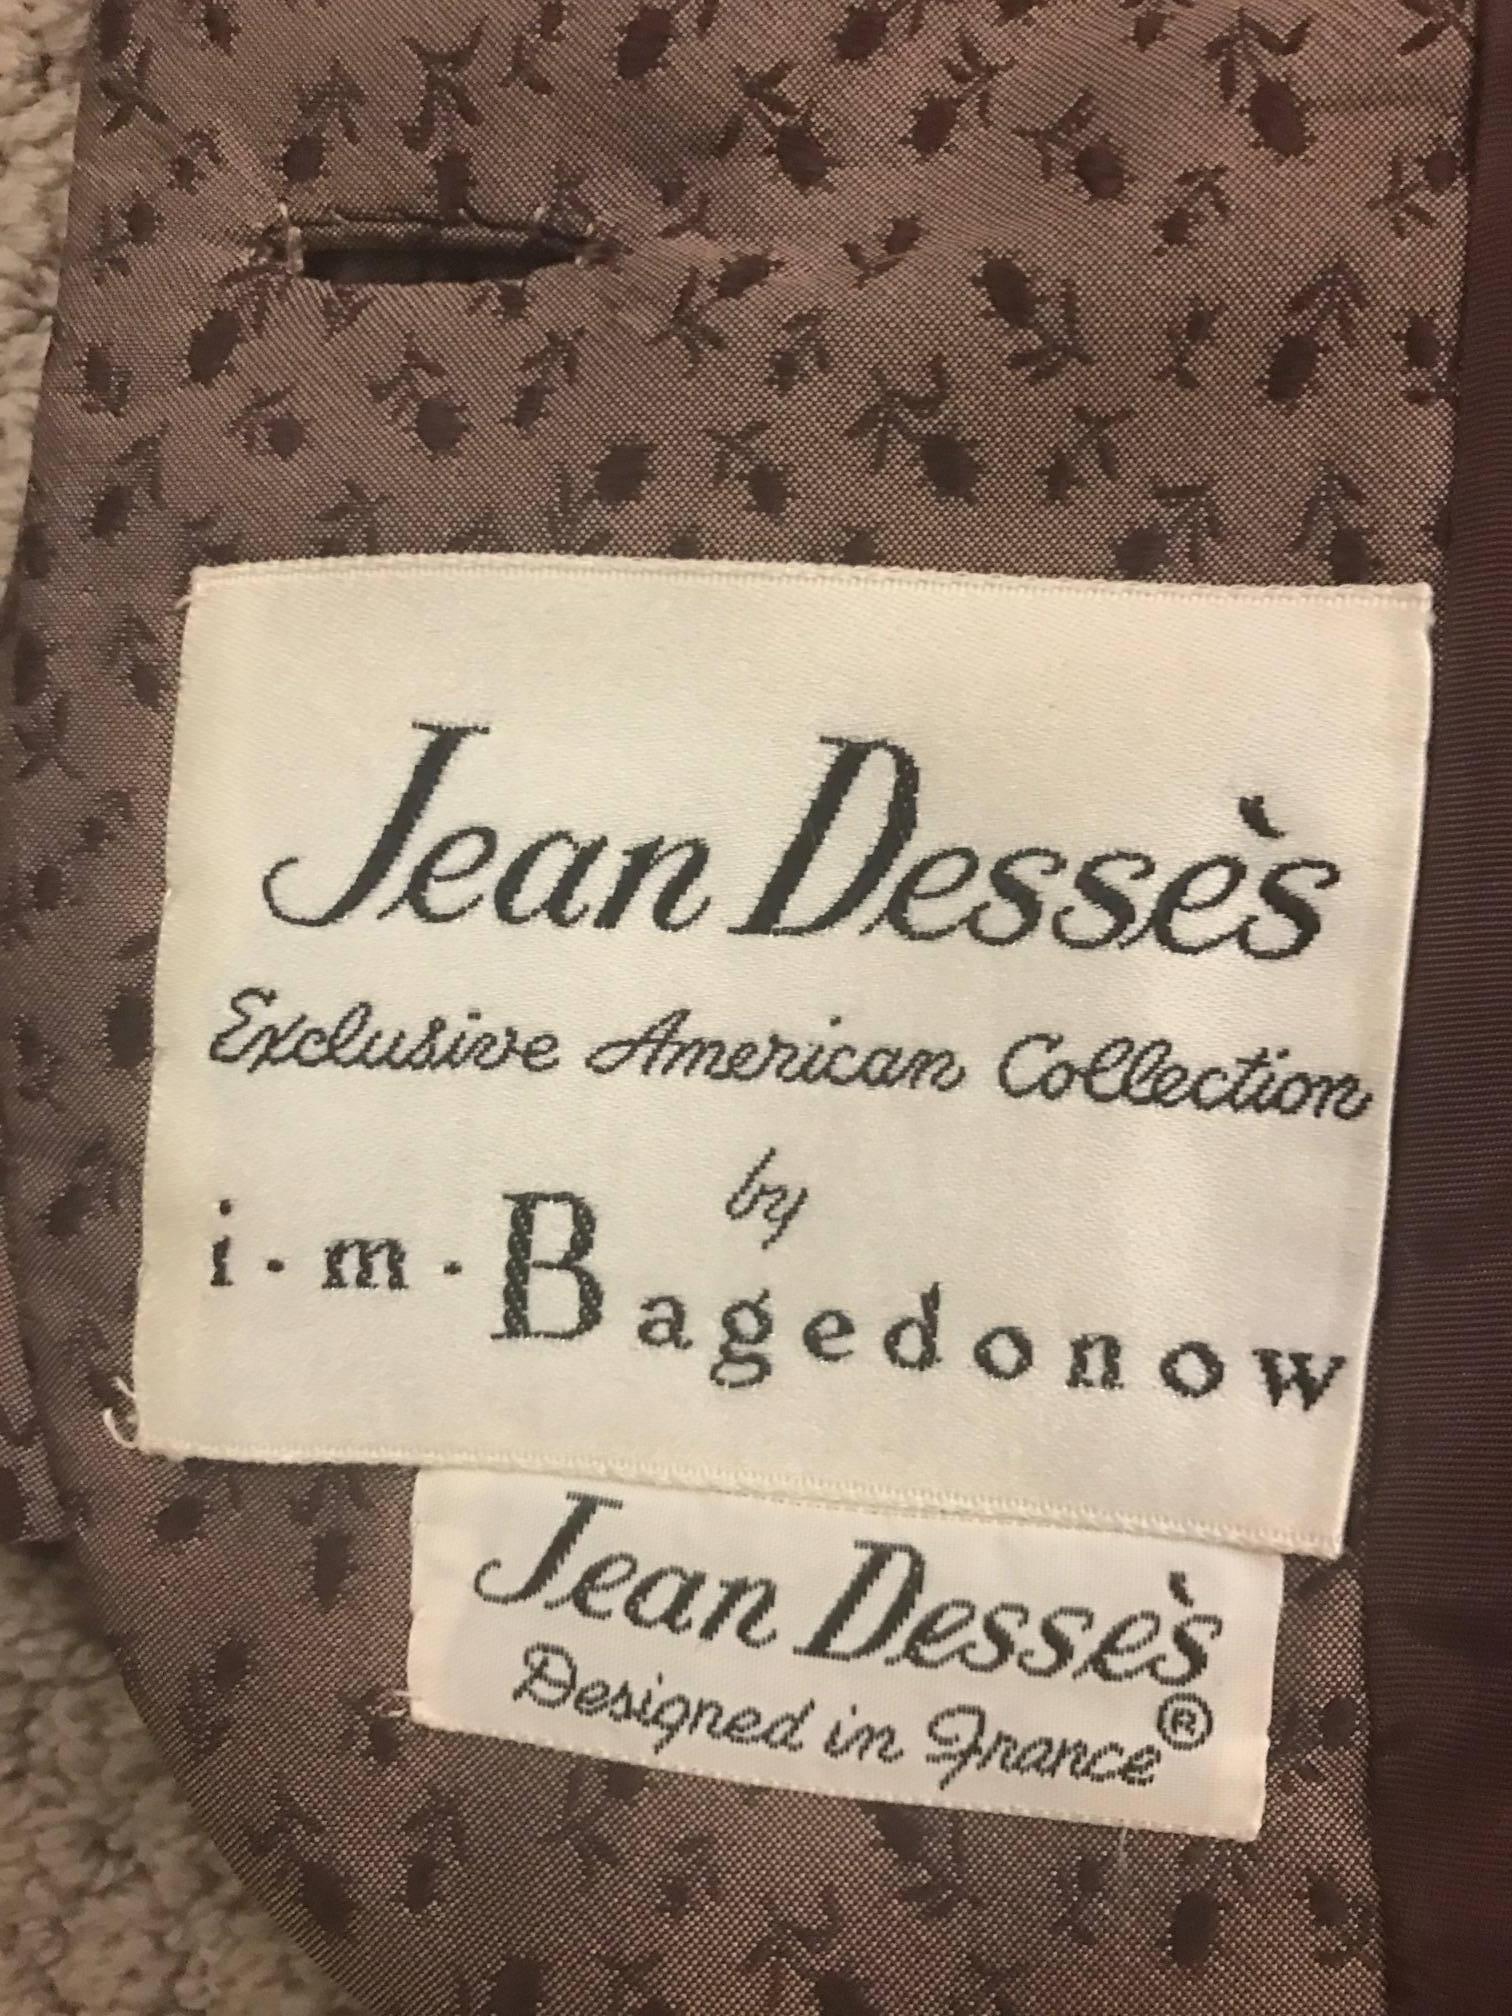 Jean Desses by IM Bagedonow Floral Skirt Suit, 1950s American Collection  For Sale 2